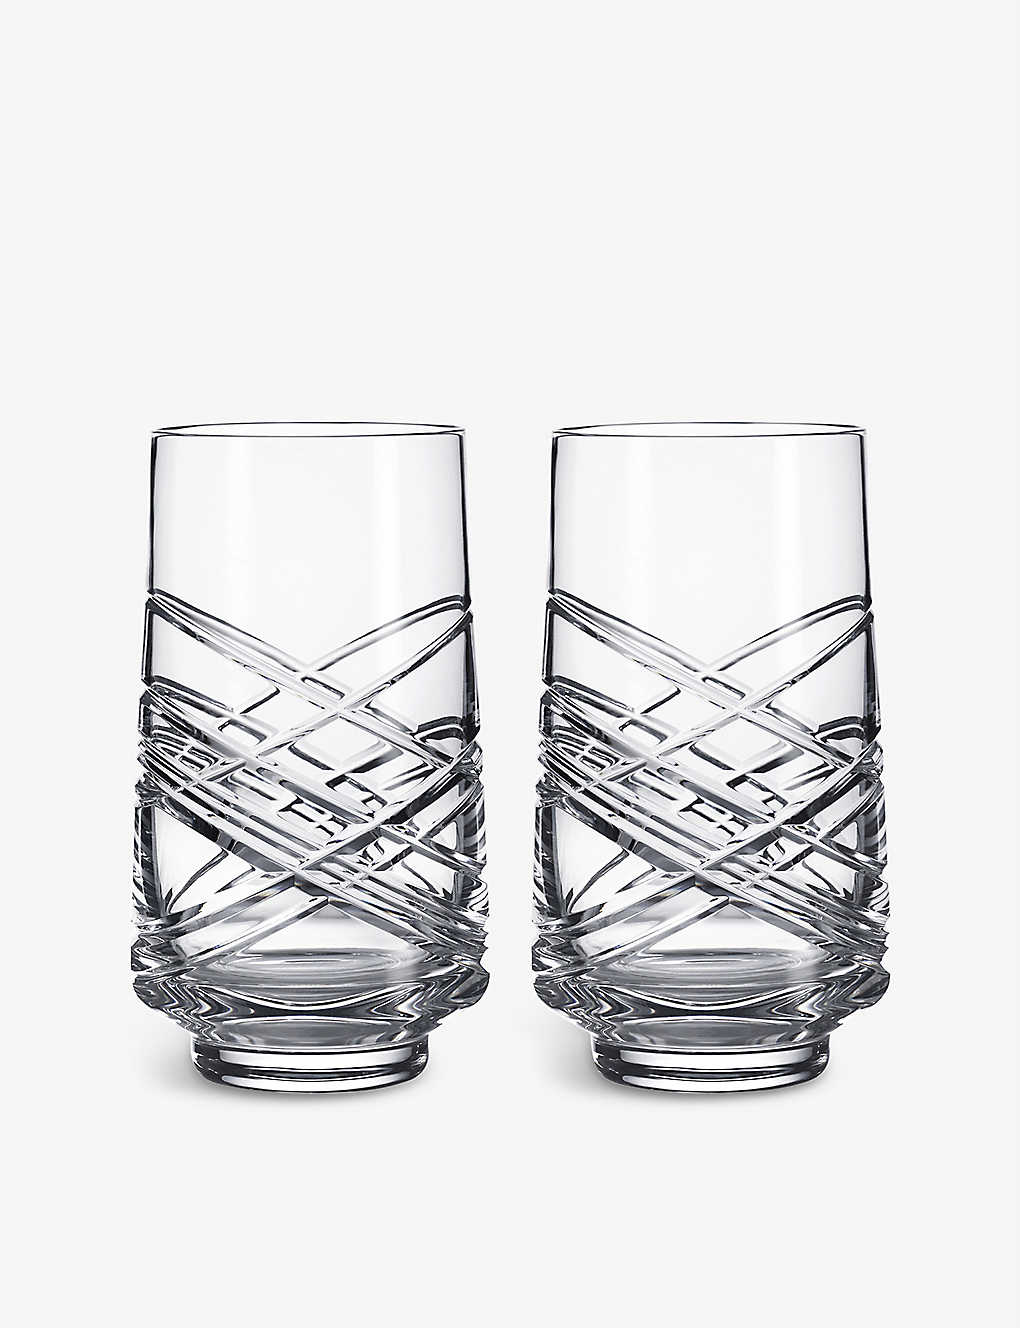 WATERFORD アラン クリスタル ハイボールグラス 2個セット Aran crystal highball glass set of two